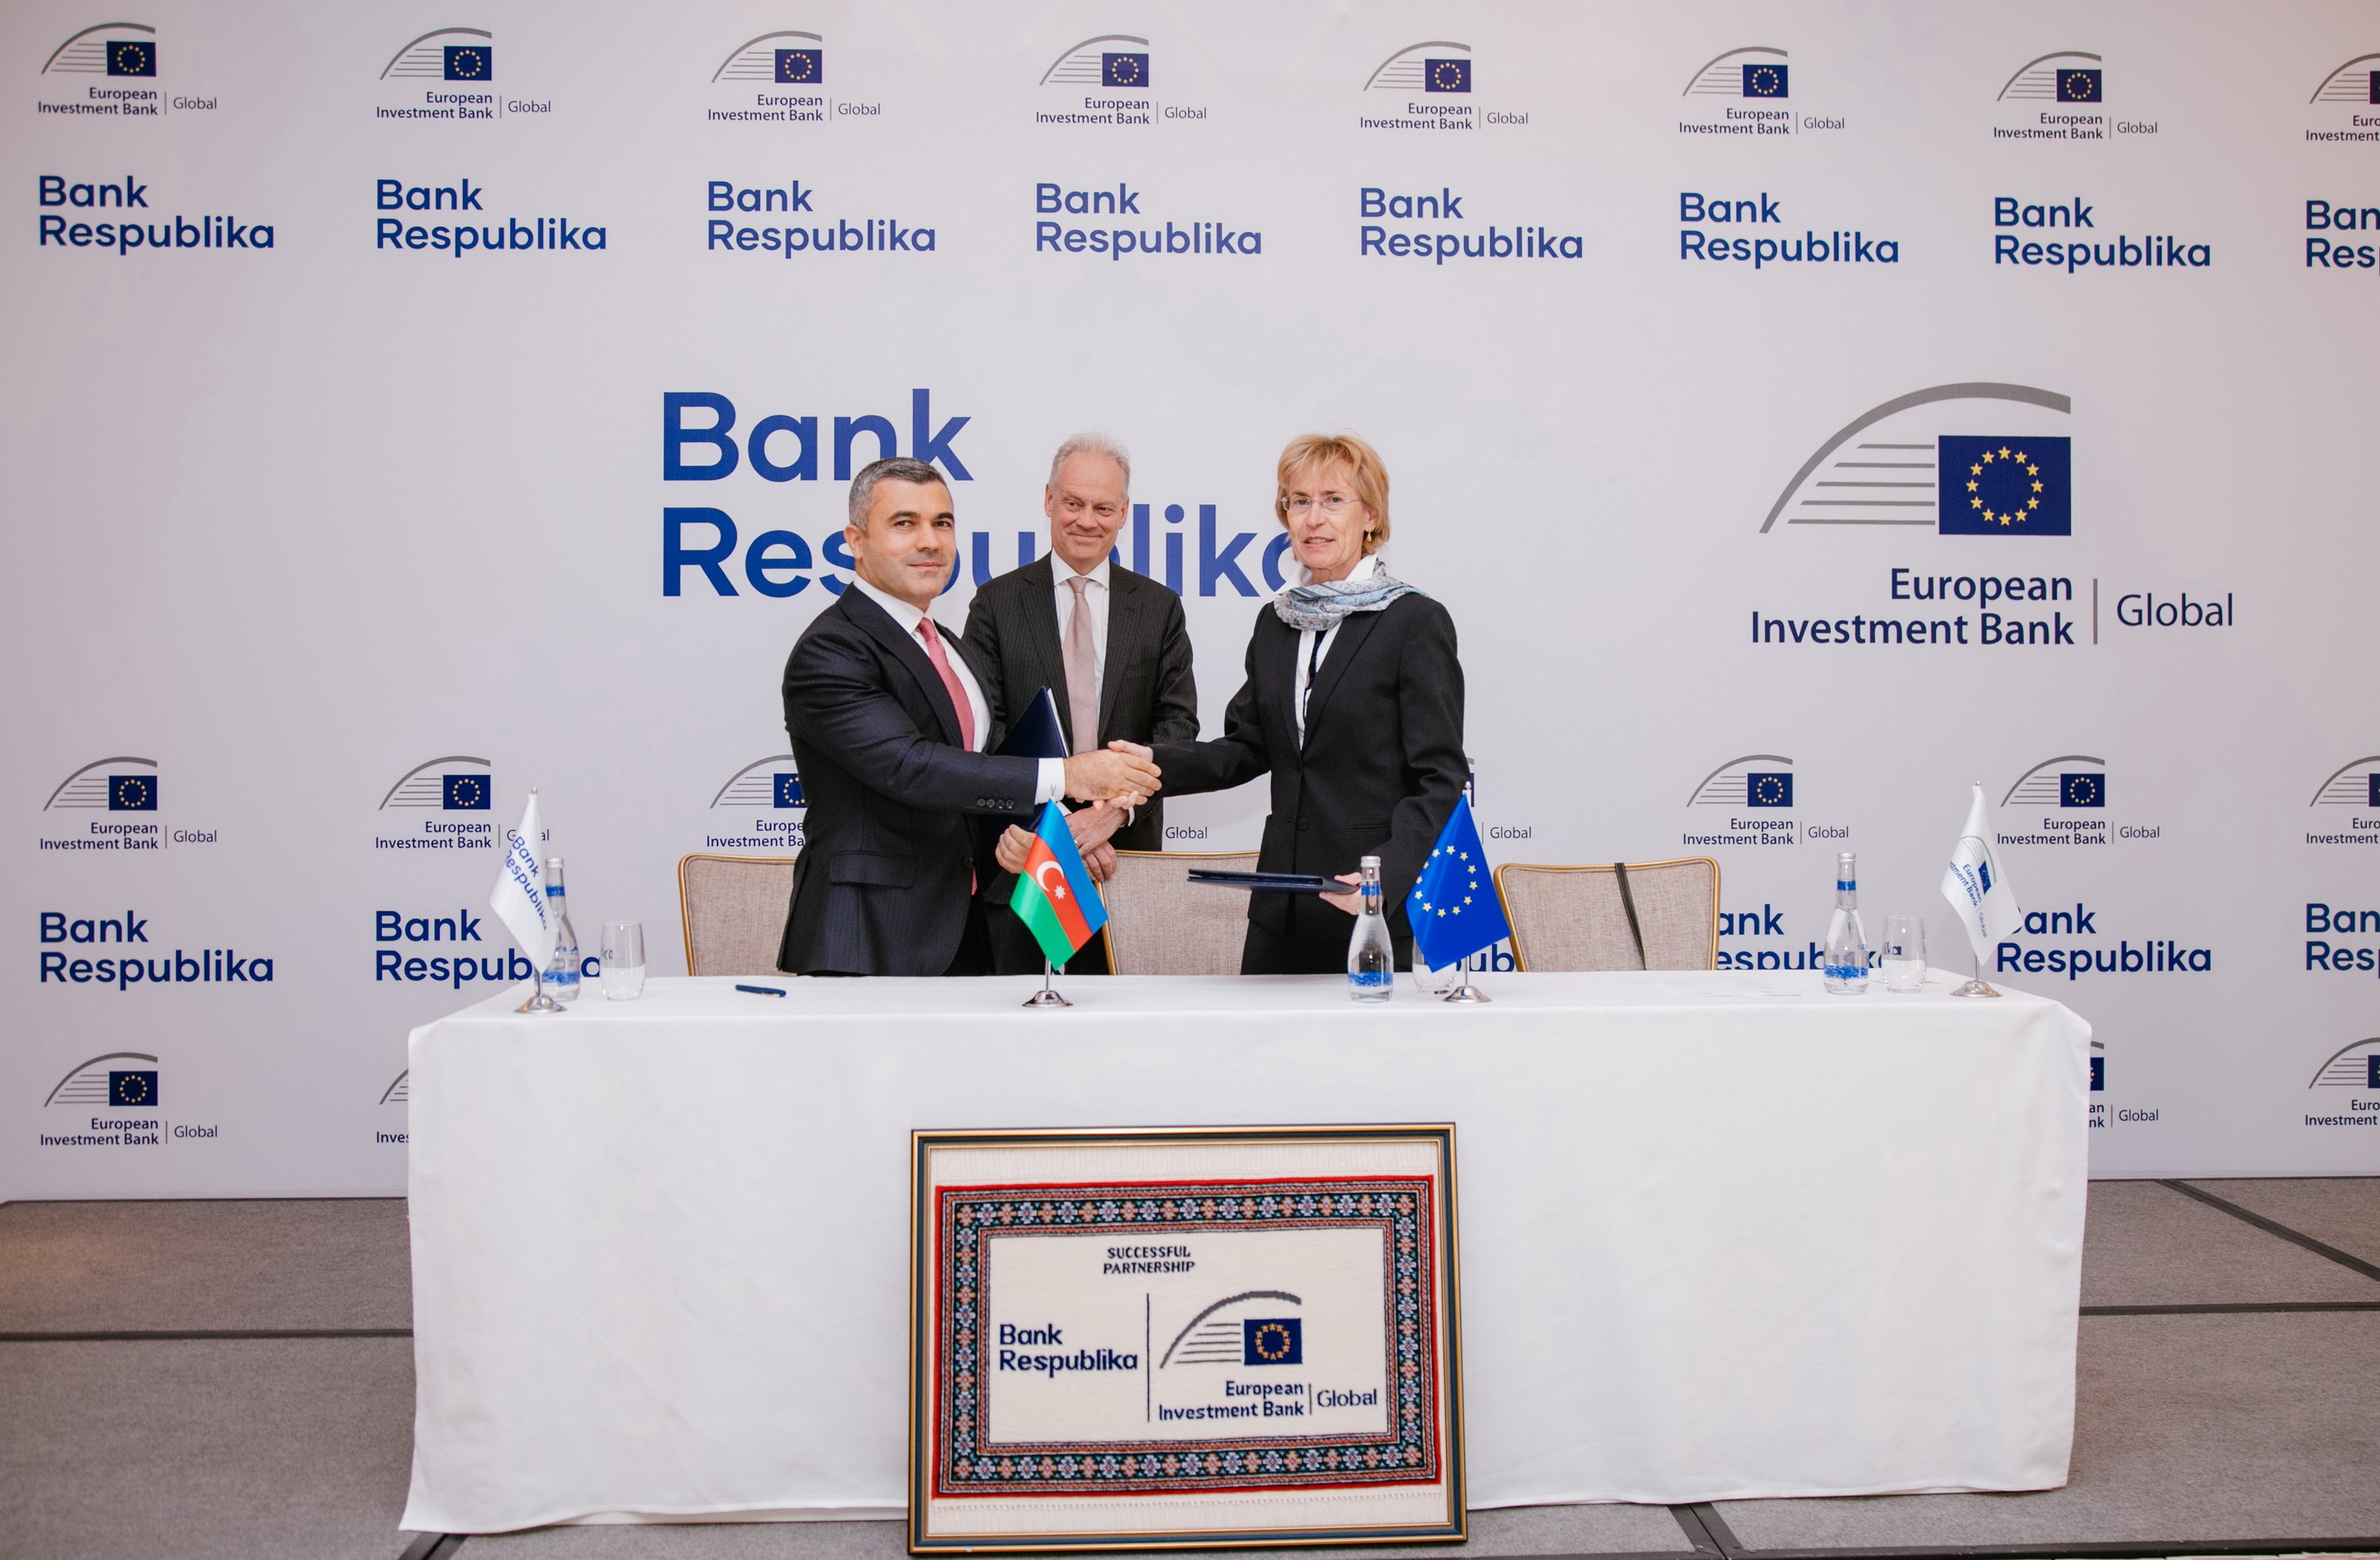 The largest financial institution in the world has chosen Bank Respublika in Azerbaijan!